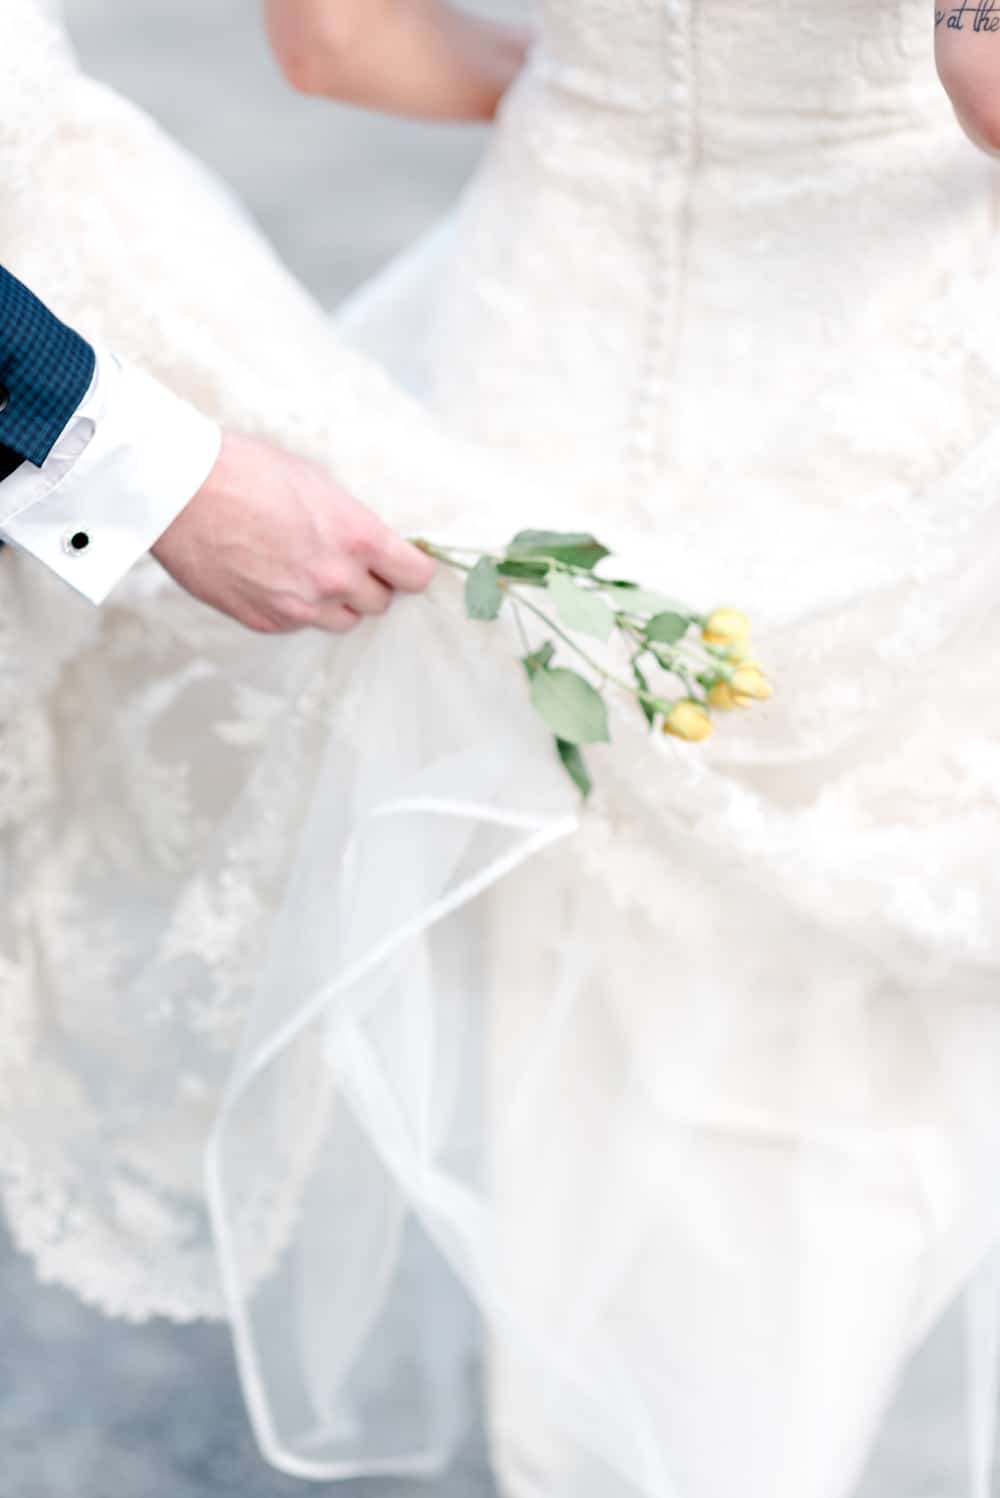 Soft focus image of groom holding flower and bride's gown